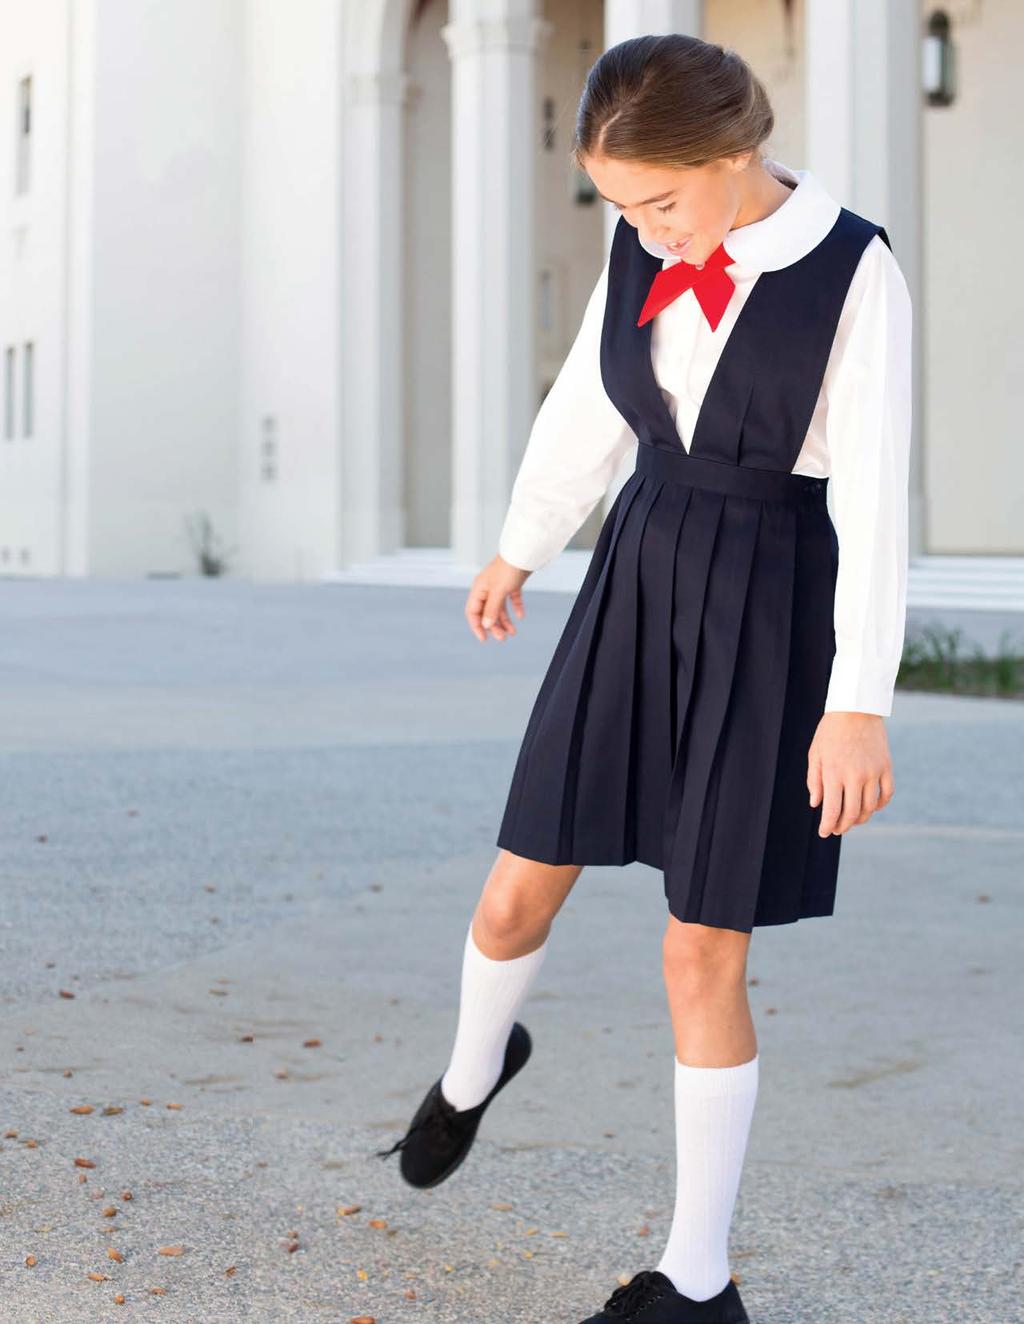 have some school fun This classic skirt jumper with a v-neck shape has baked-in pretty knife pleats all around. Easy to dress and iron free.